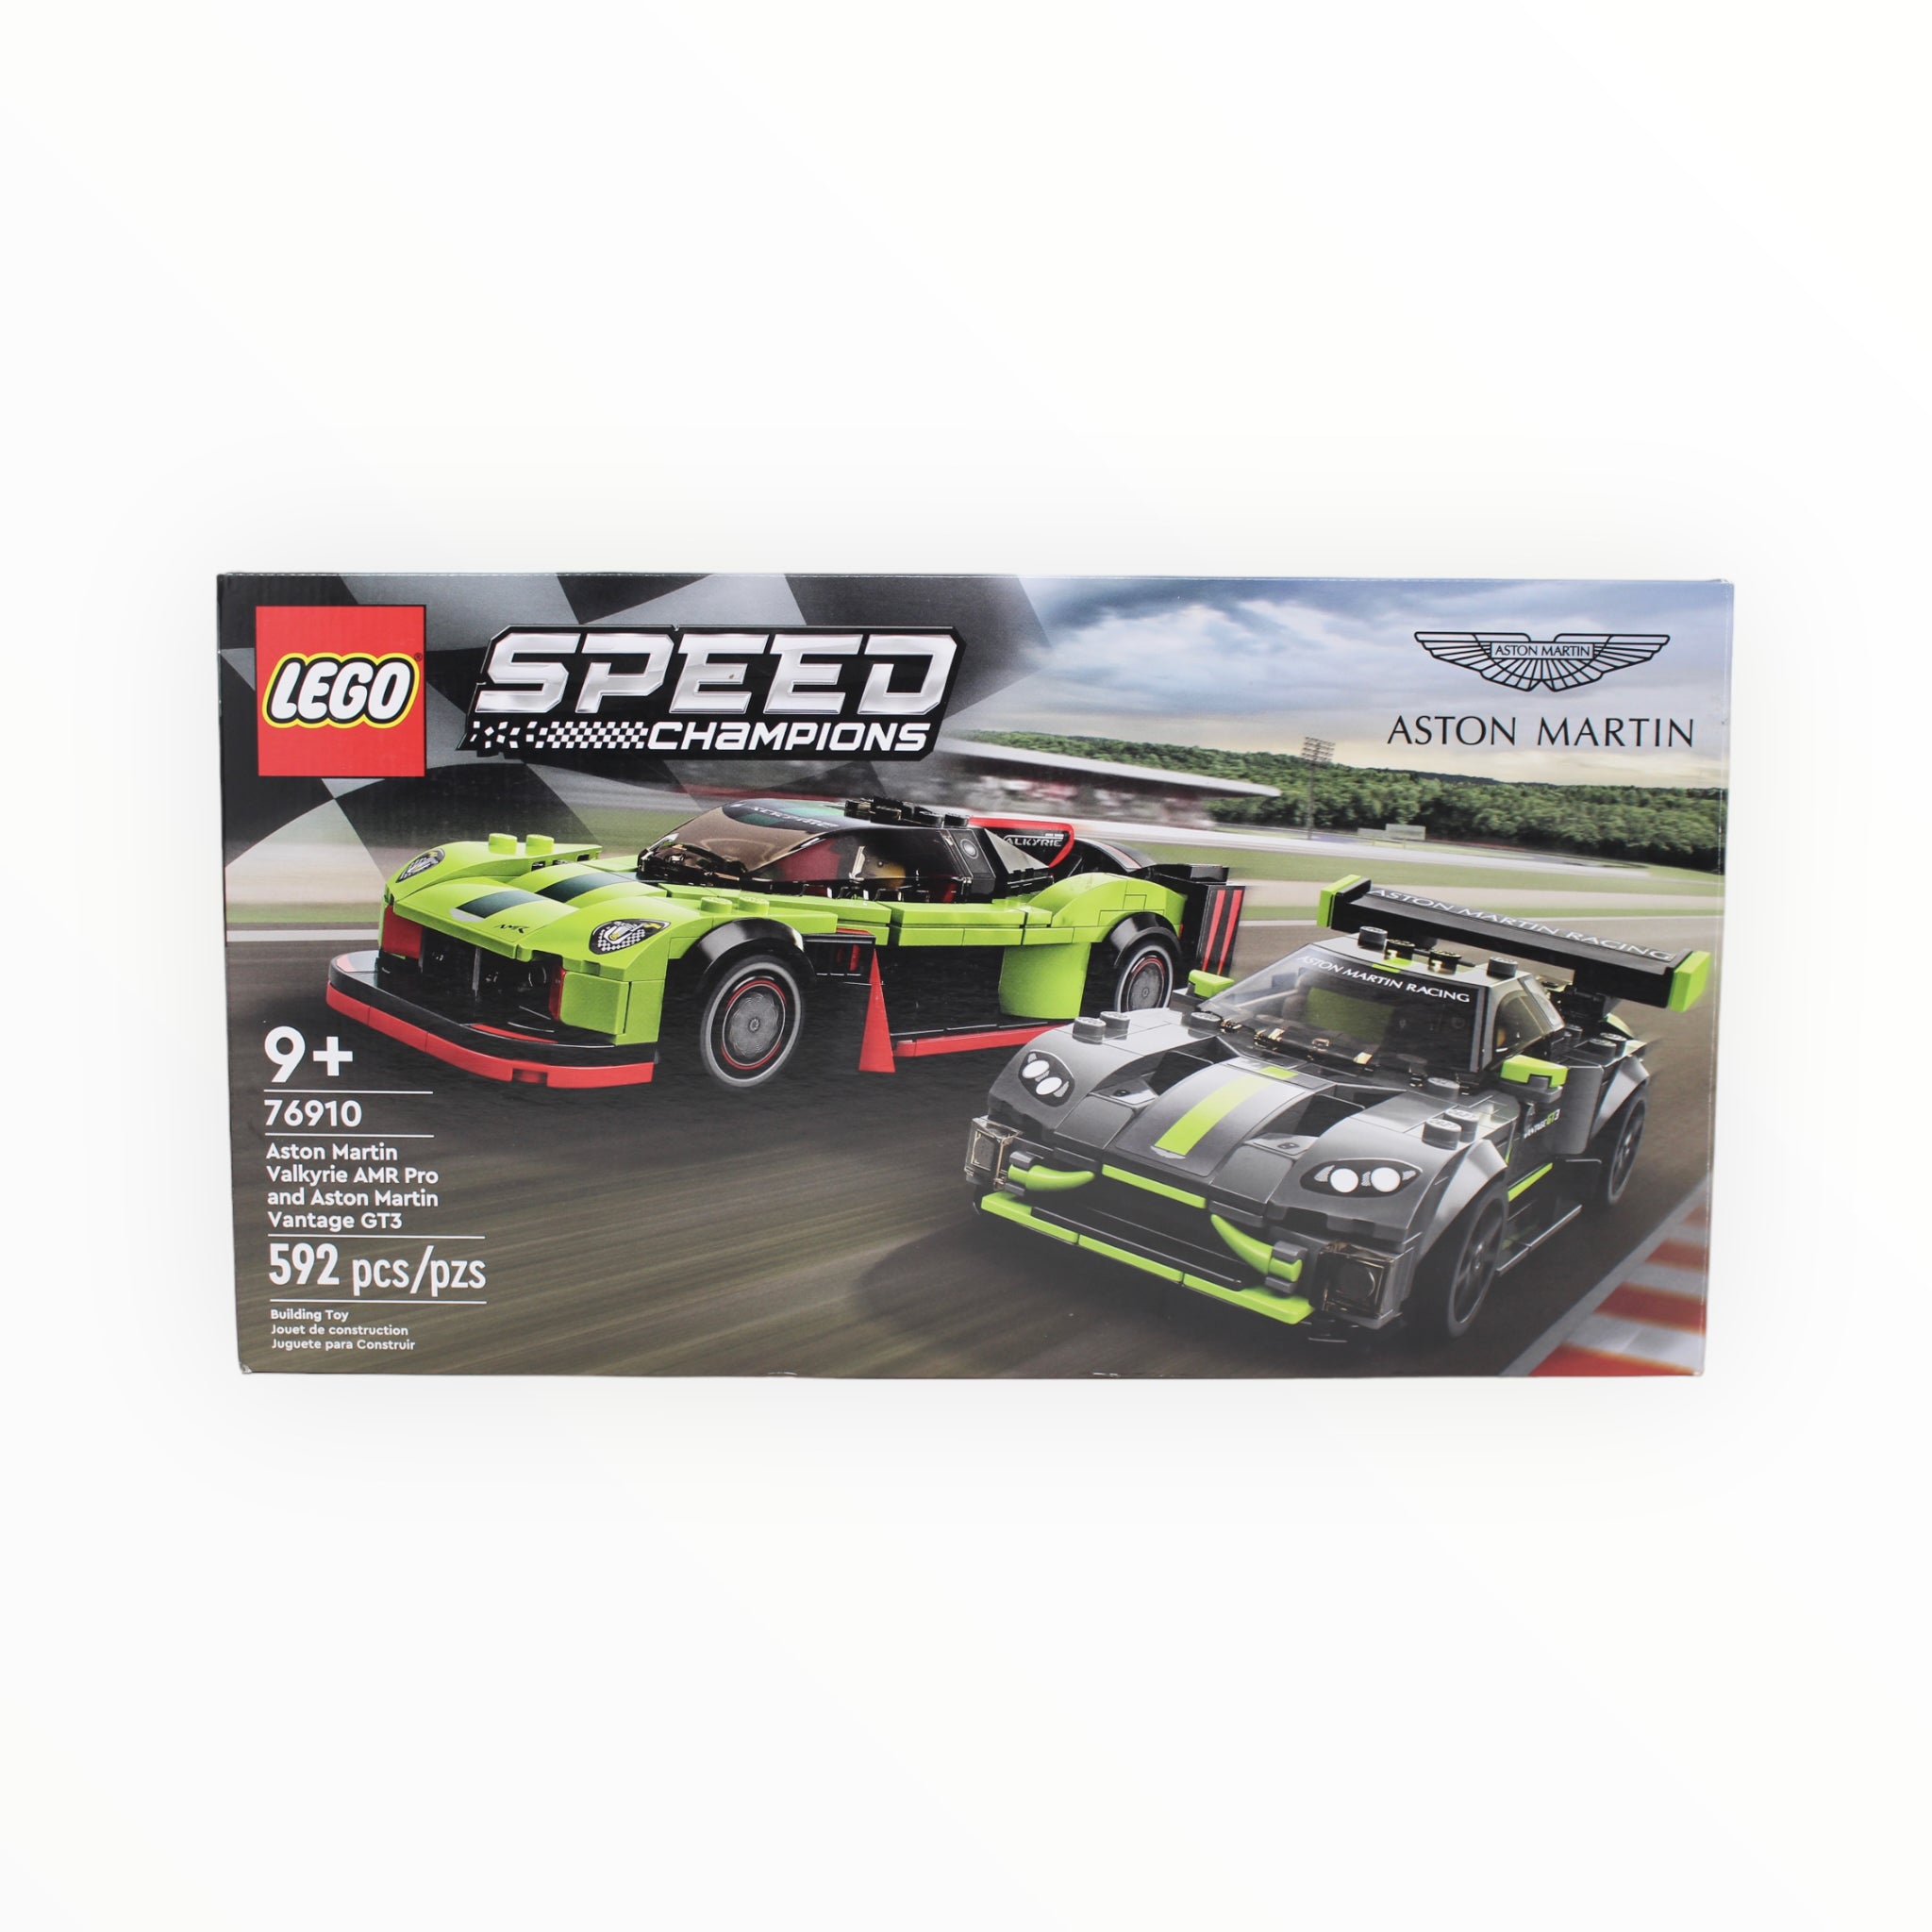 Certified Used Set 76910 Speed Champions Aston Martin Valkyrie AMR Pro and Aston Martin Vantage GT3